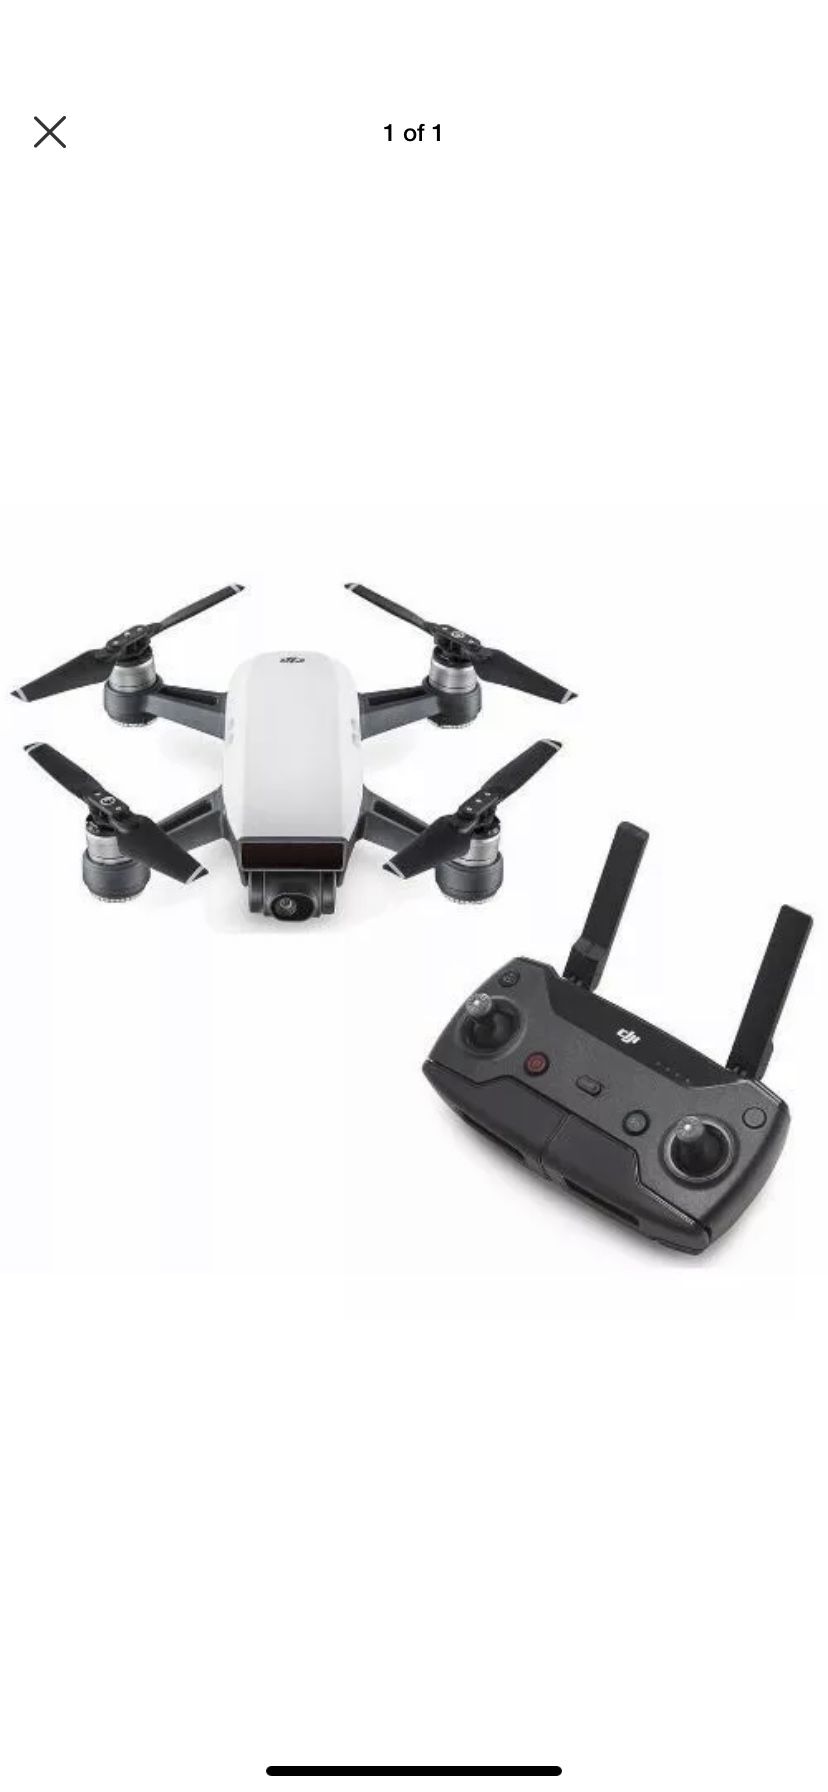 Brand New DJI Spark Drone with Remote